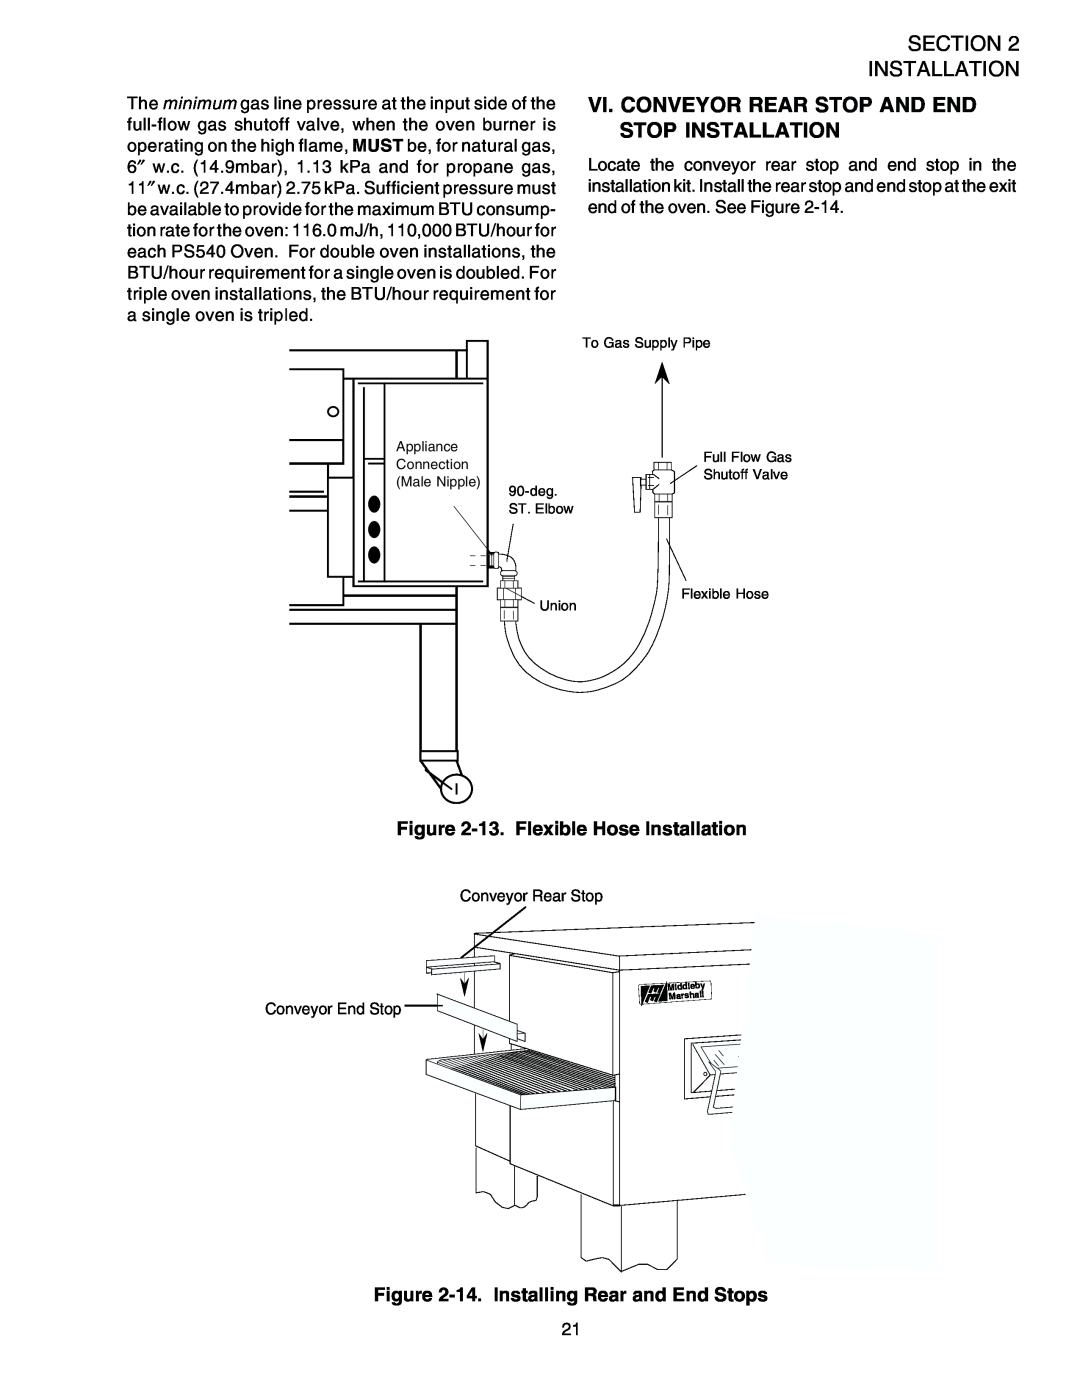 Middleby Marshall PS540 installation manual Vi. Conveyor Rear Stop And End Stop Installation, 13.Flexible Hose Installation 